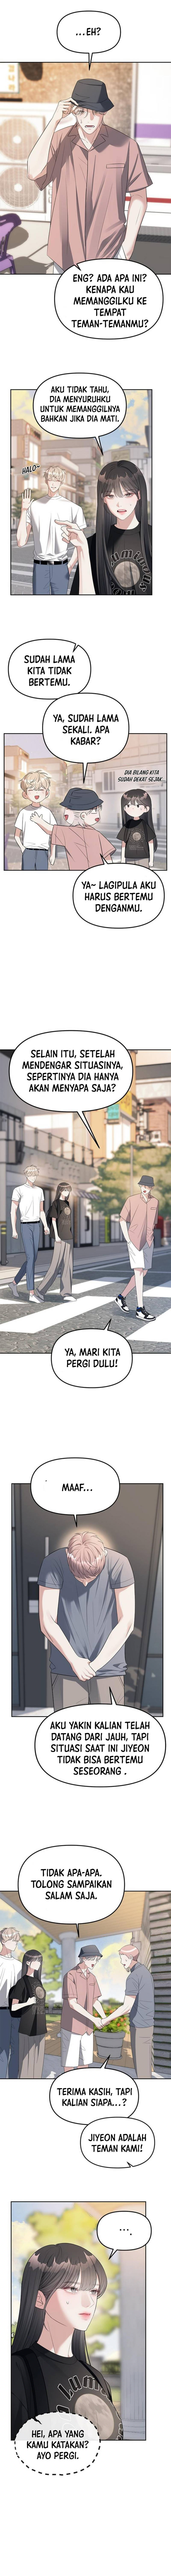 Undercover! Chaebol High School Chapter 38